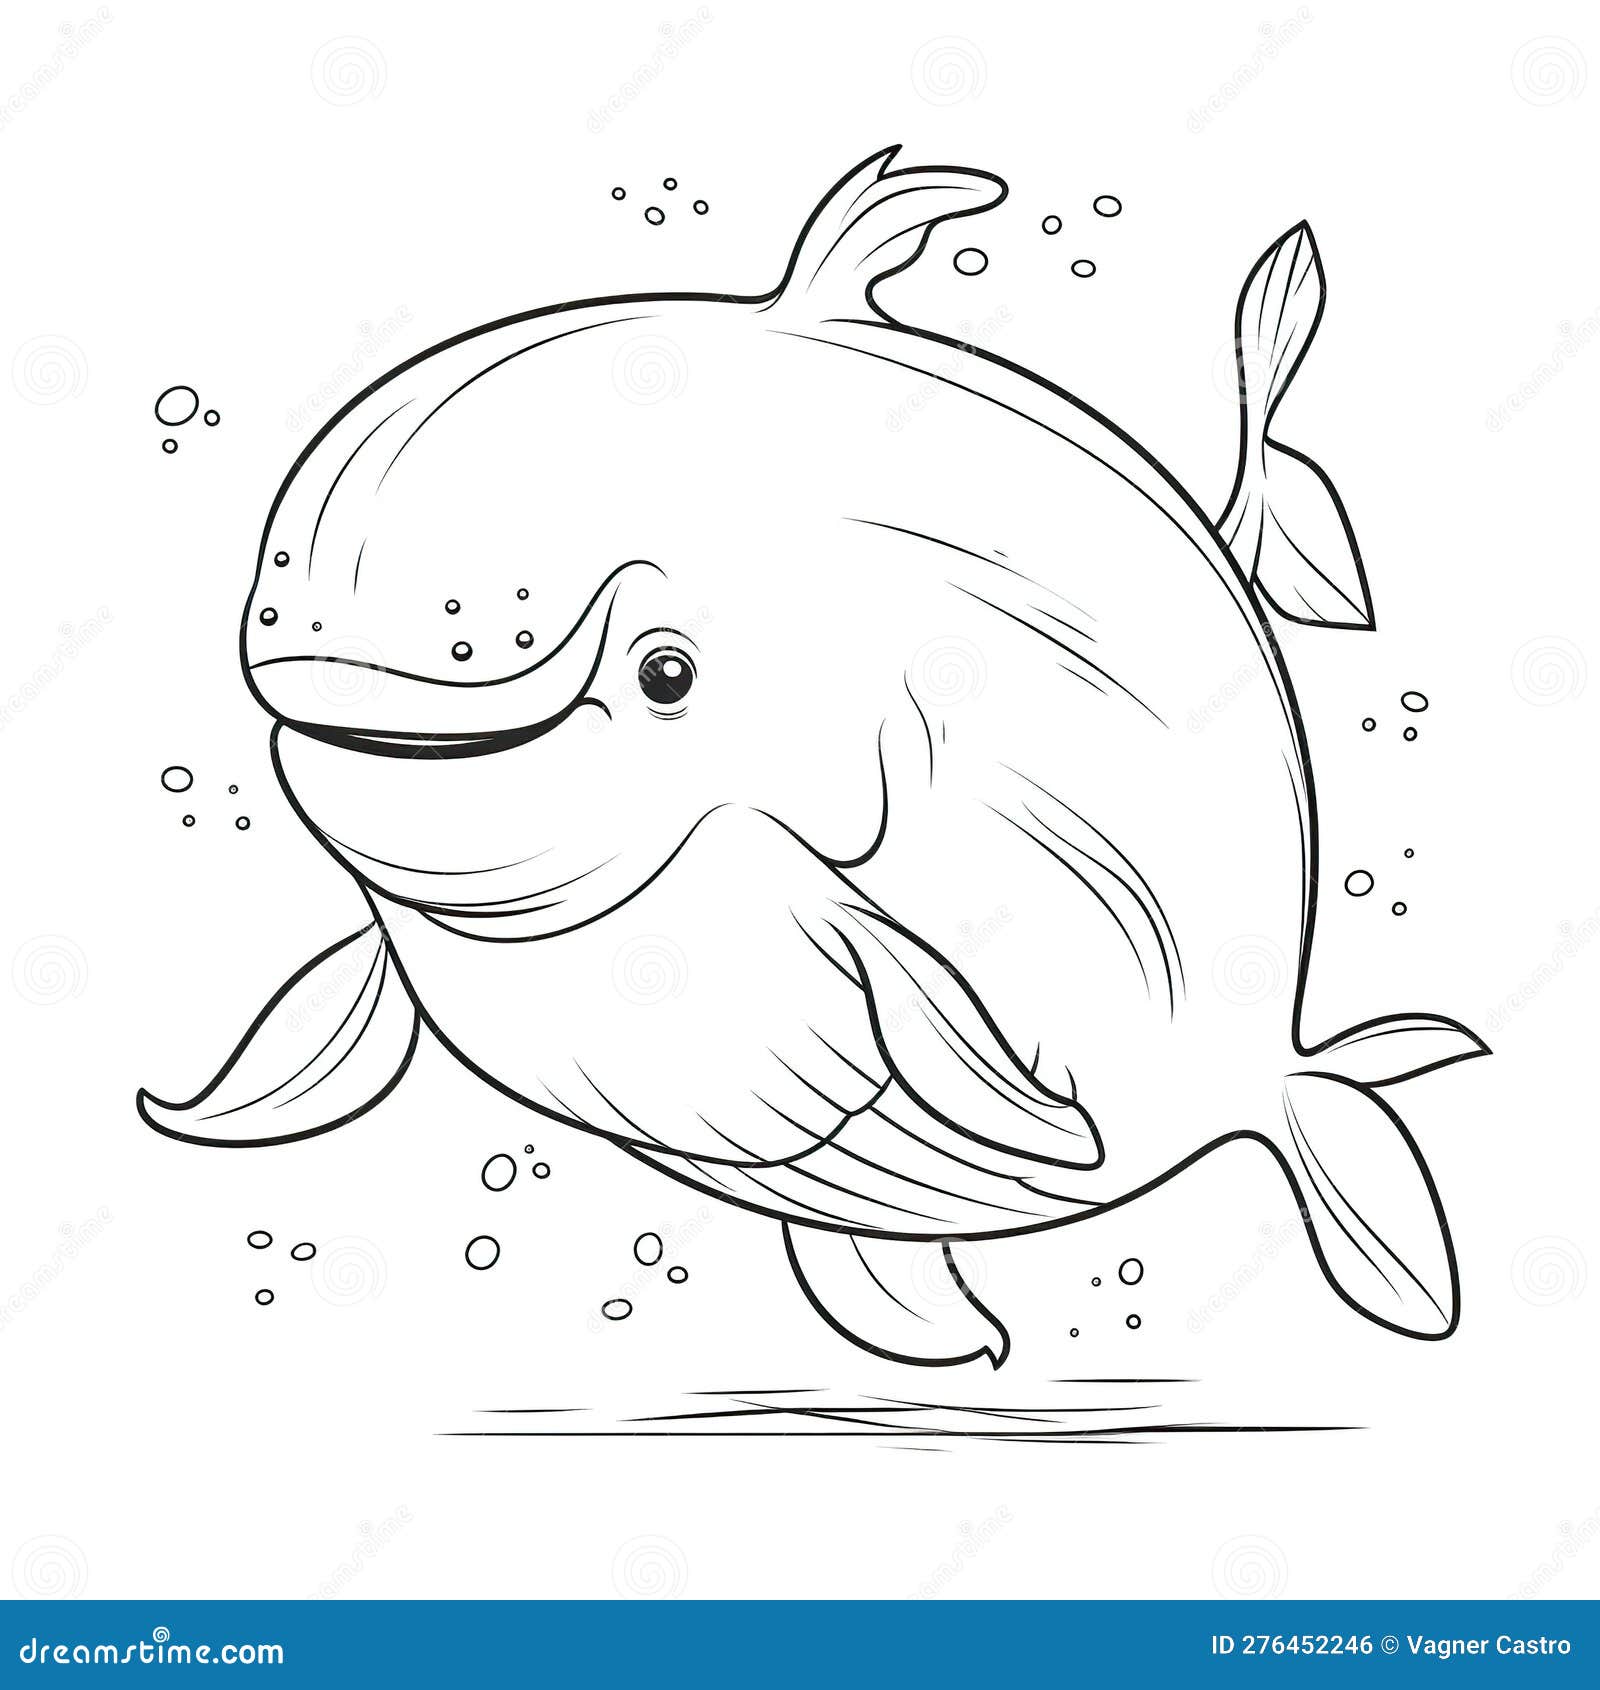 Kids Coloring Page of a Whale on the Sea that is Blank and Downloadable ...